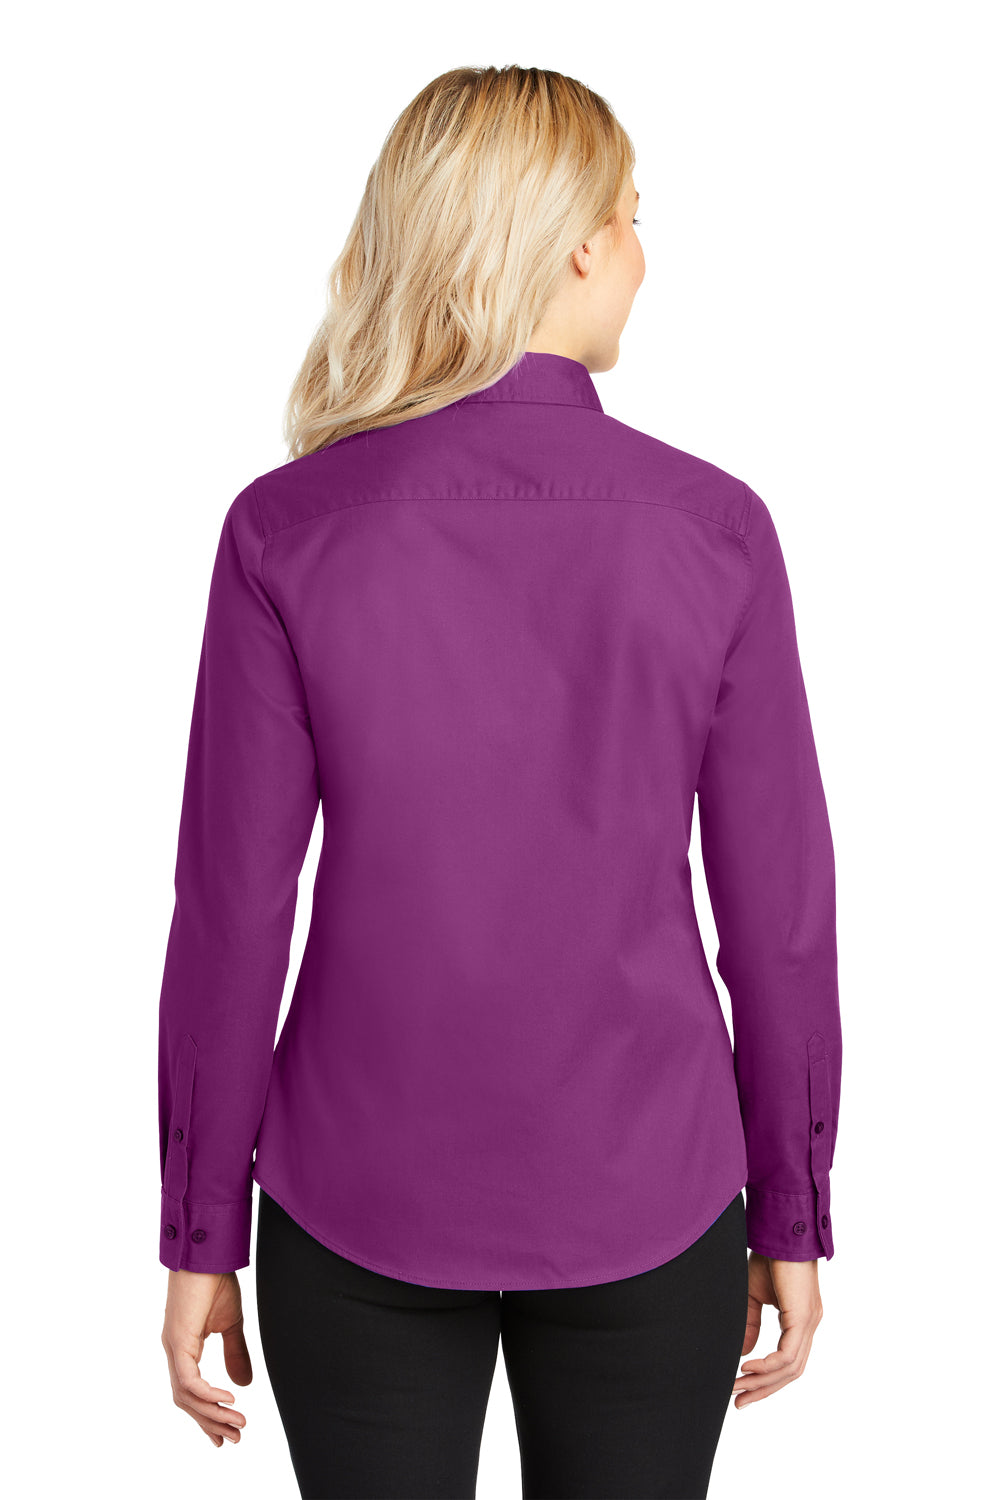 Port Authority L608 Womens Easy Care Wrinkle Resistant Long Sleeve Button Down Shirt Deep Berry Purple Back